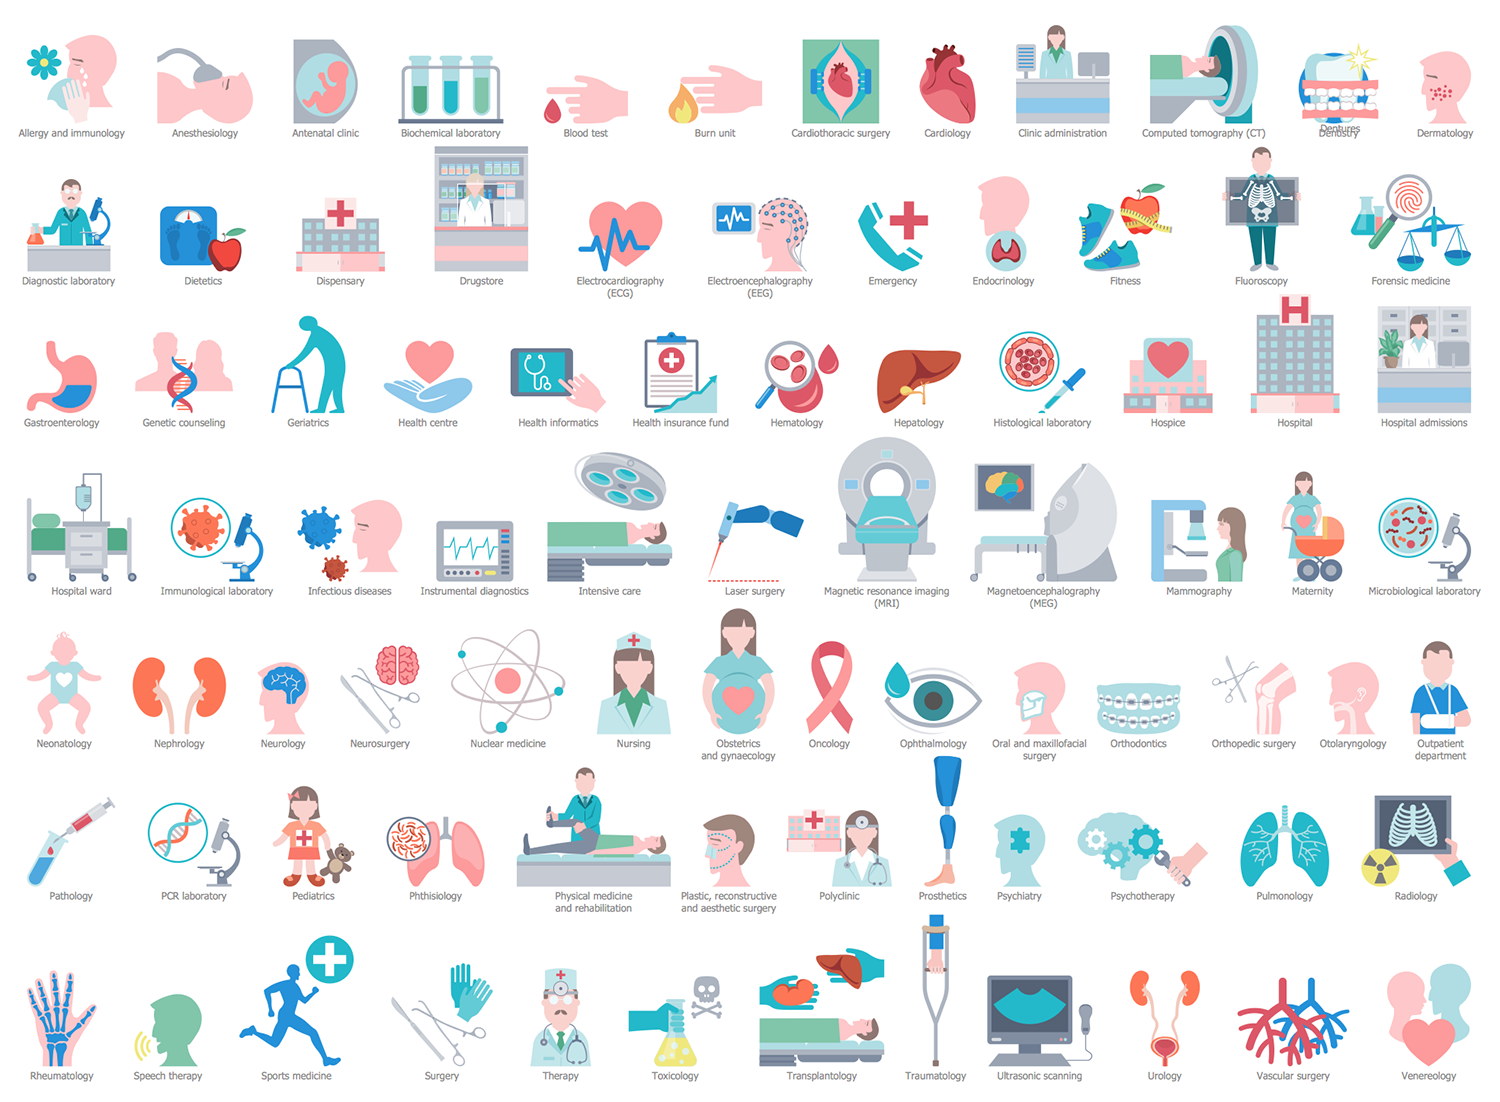 New Healthcare Management Workflow Solution for ConceptDraw PRO Image